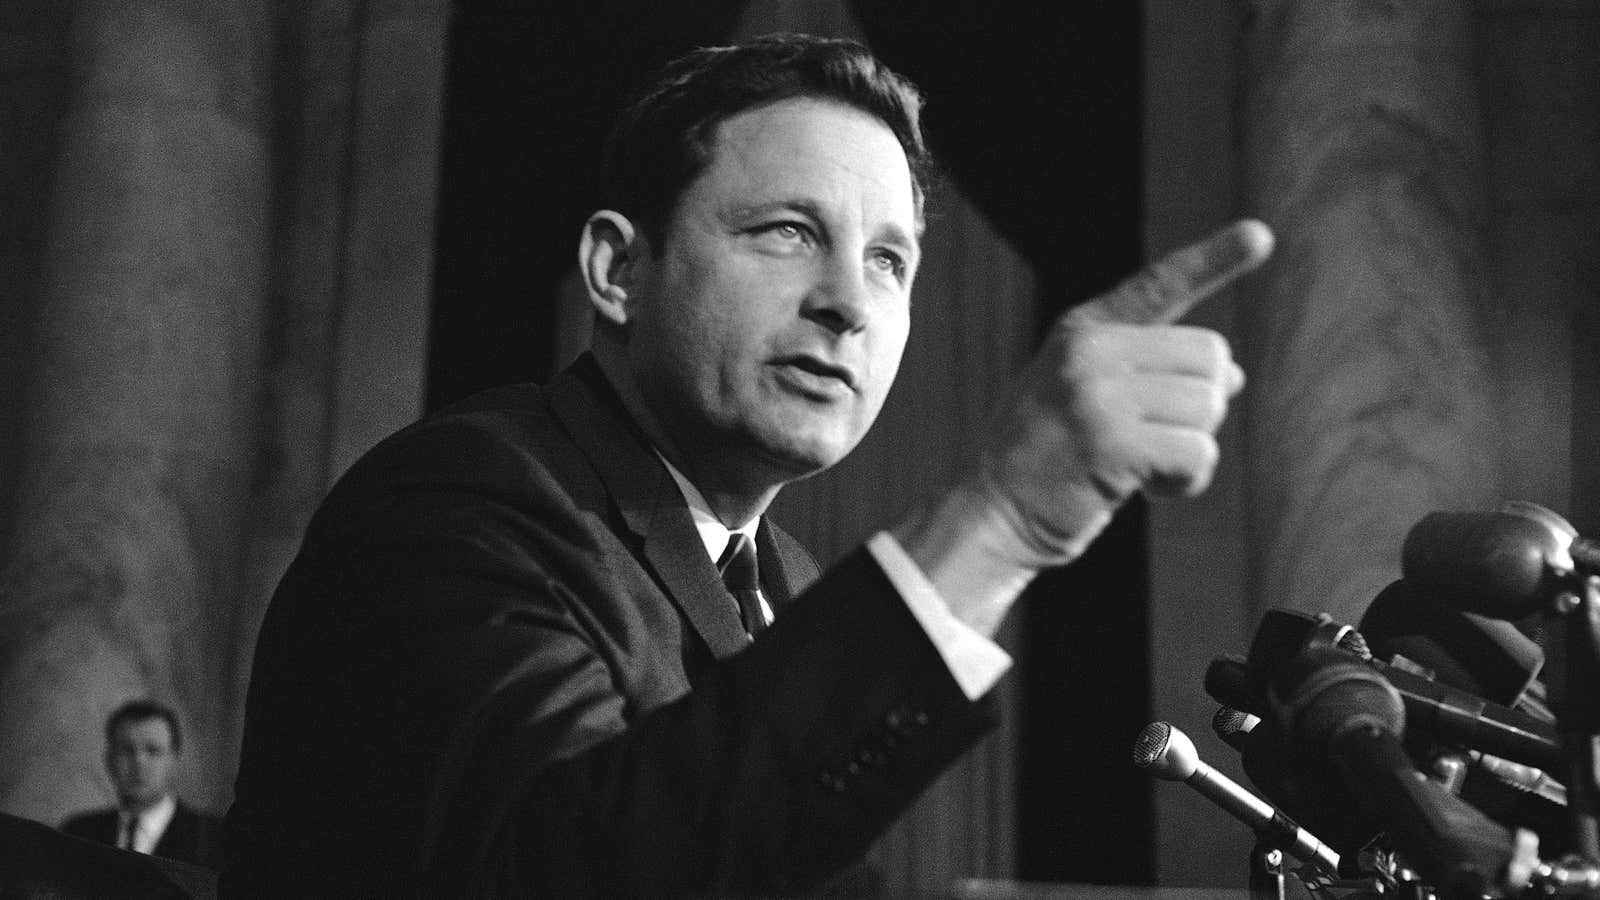 Senator Birch Bayh in Nov. 8, 1968, two years before he began working on laws that would codify gender equality.